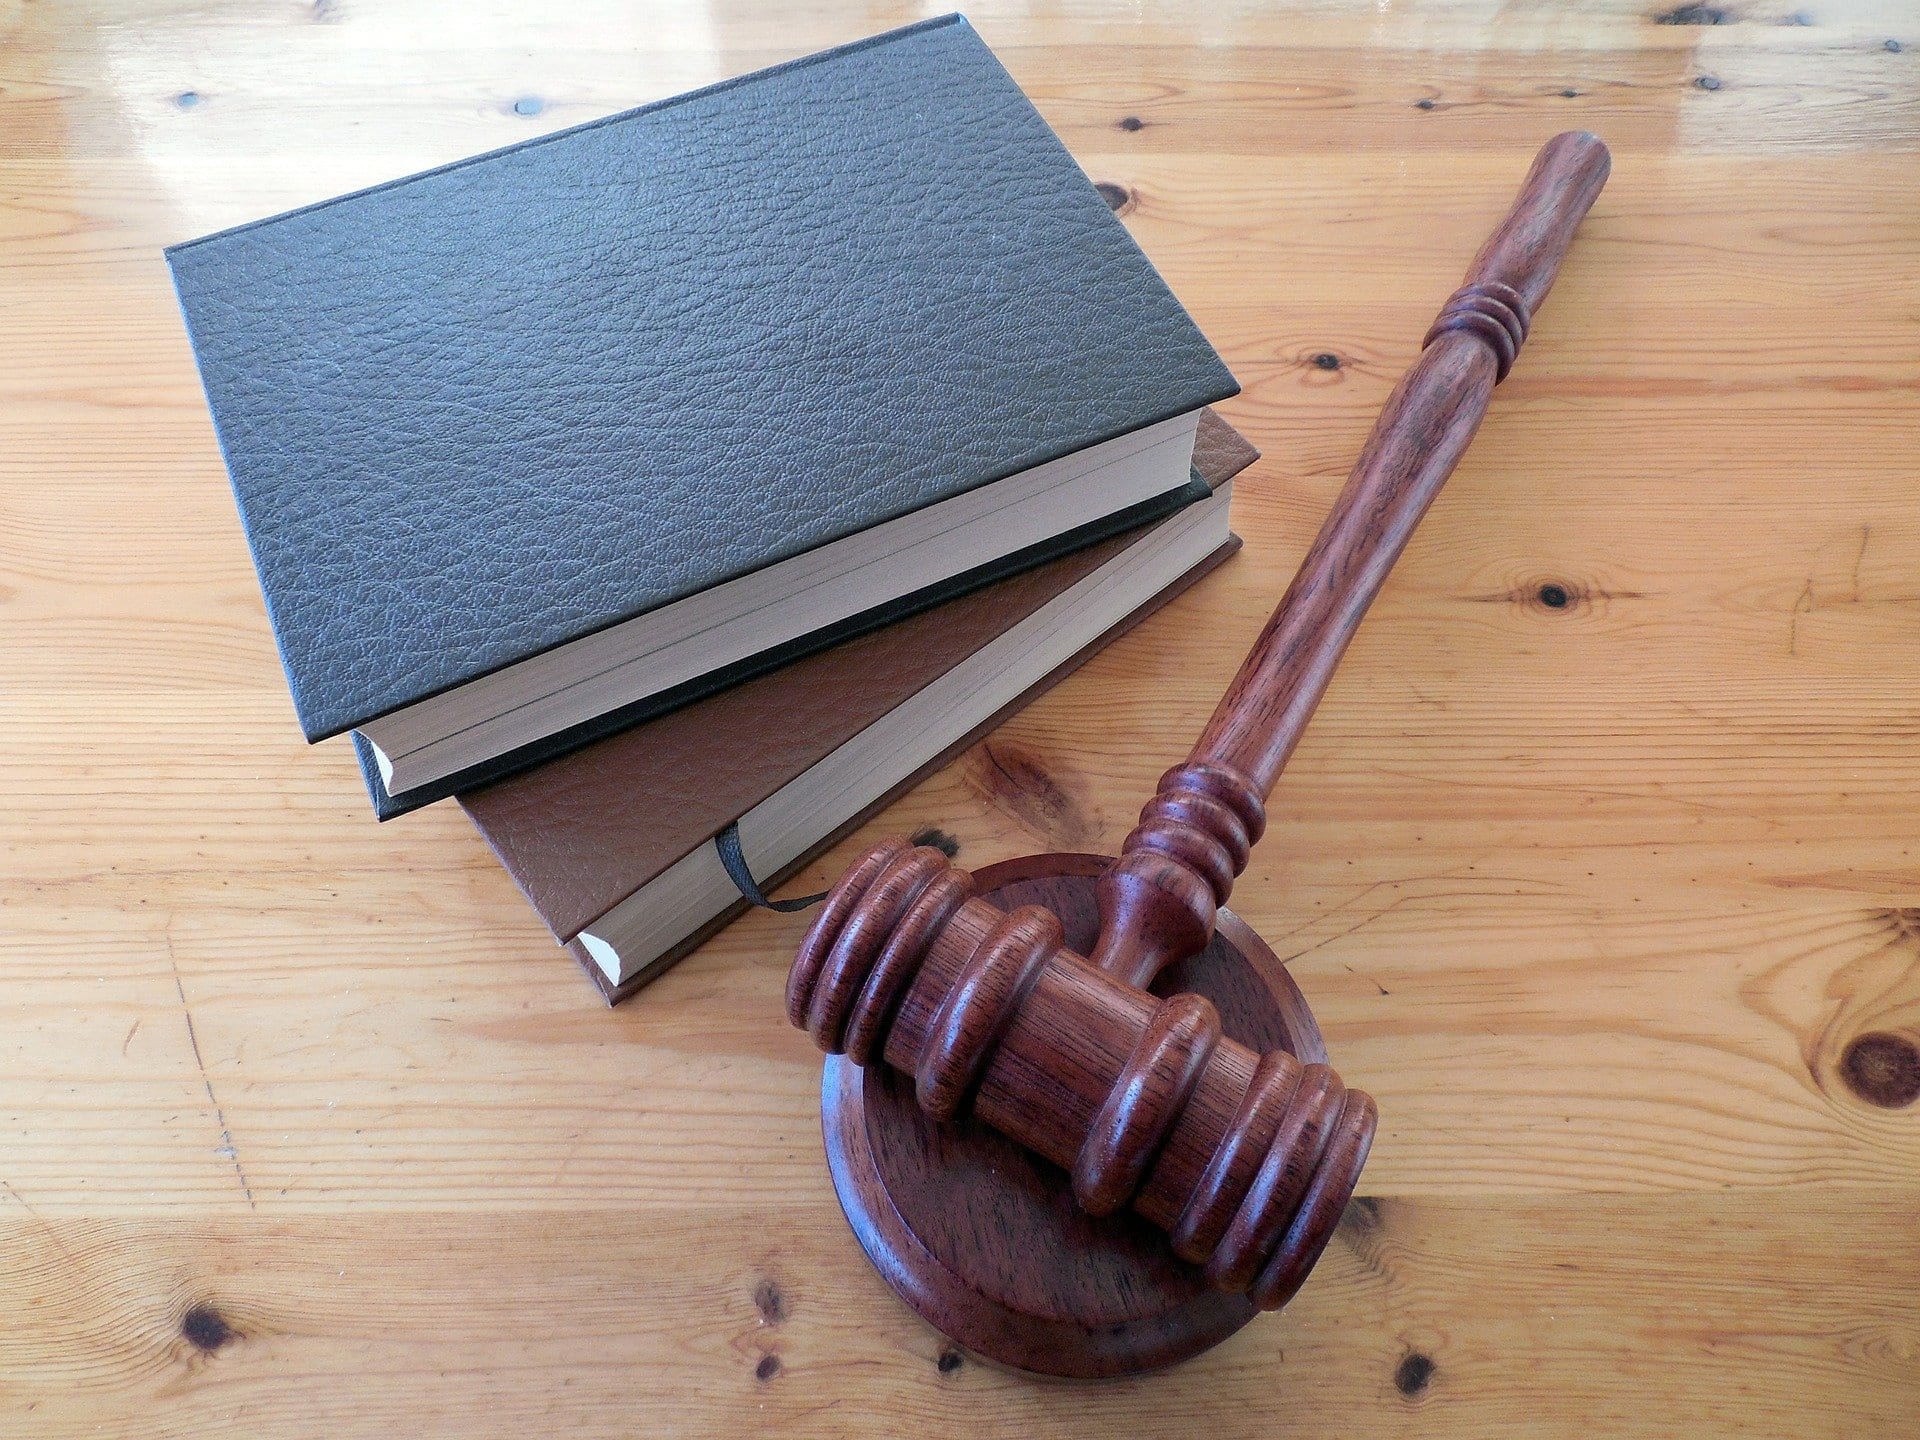 Gavel and two hardbound books on wooden table; image by Succo, via Pixabay.com.